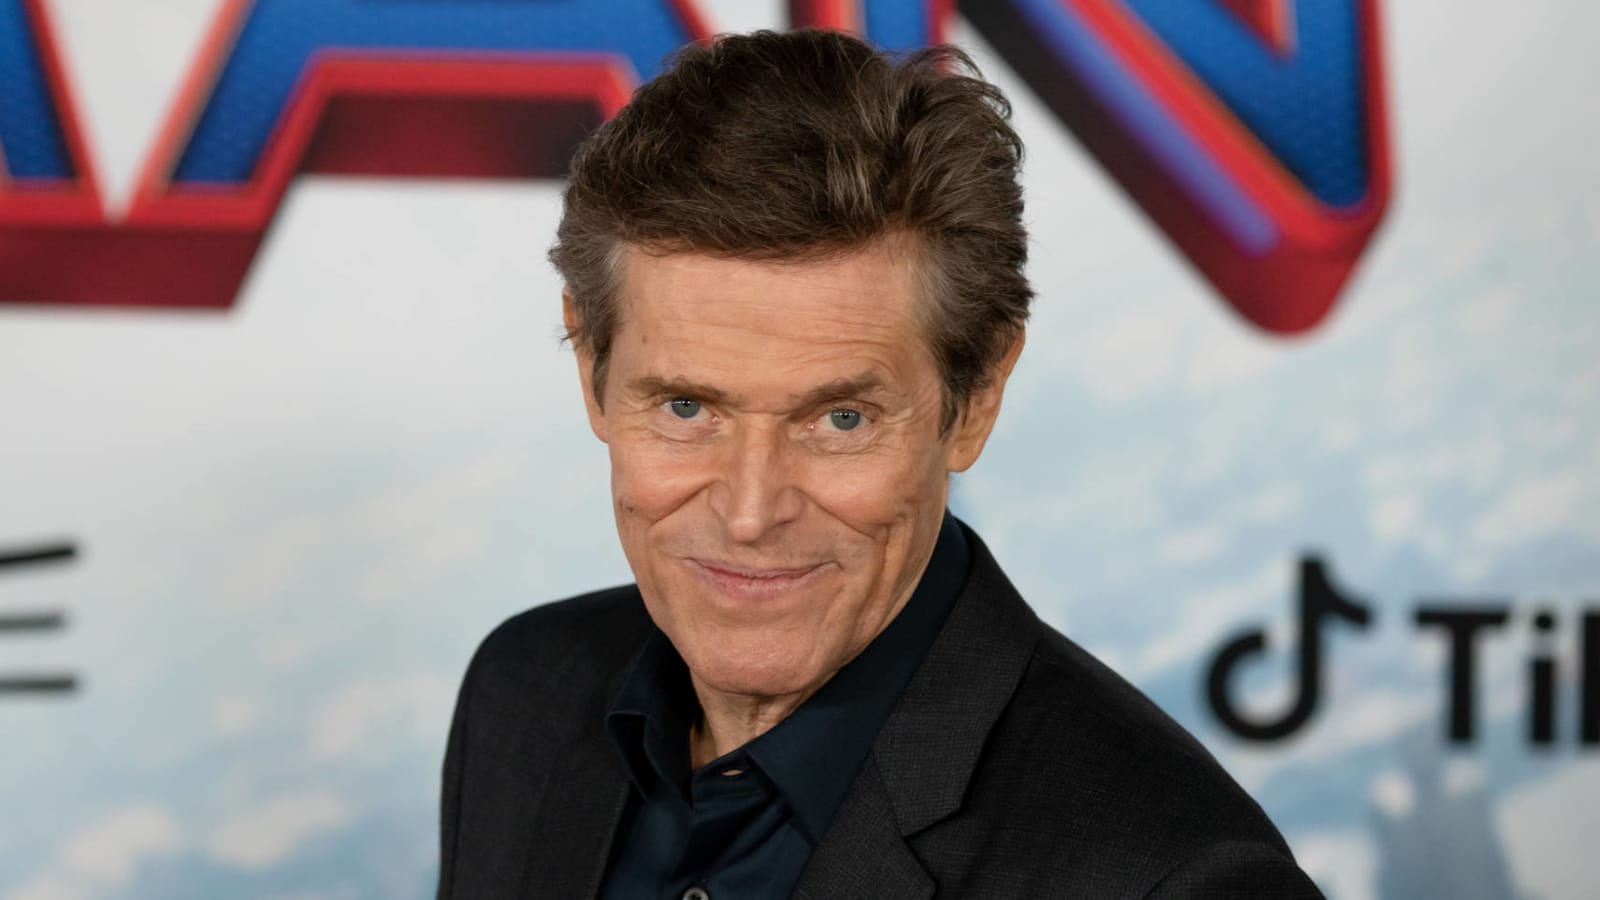 'SNL' announces Willem Dafoe and Katy Perry for Jan. 29 episode